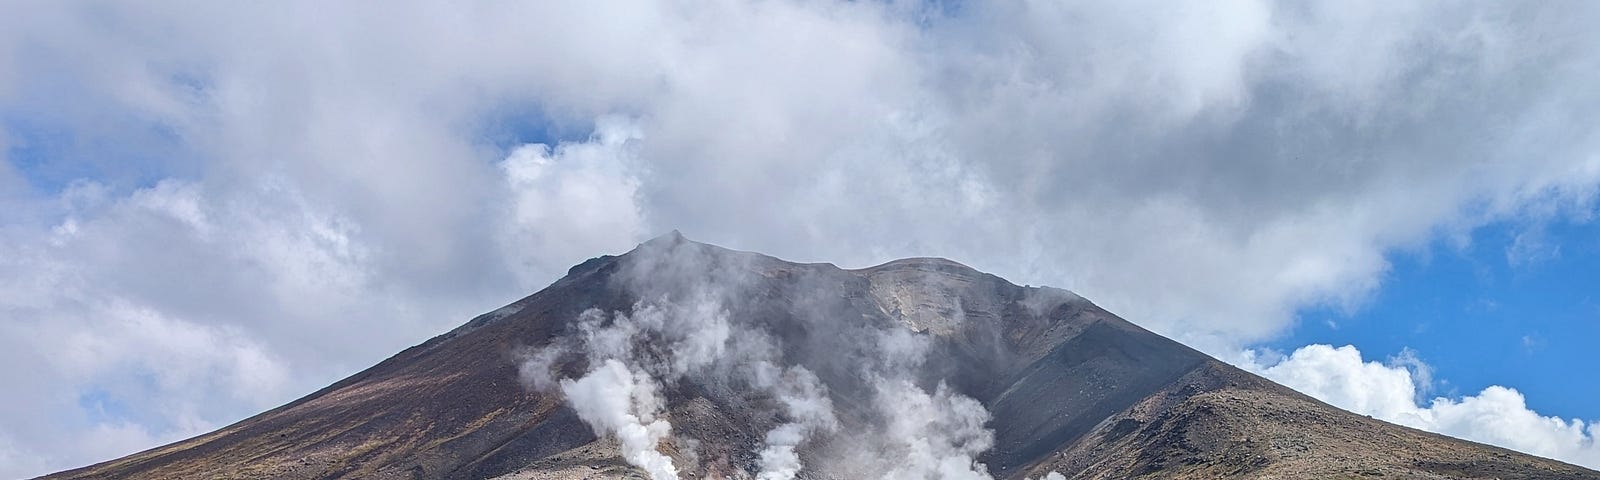 Mountain with fumaroles rising like steam vents